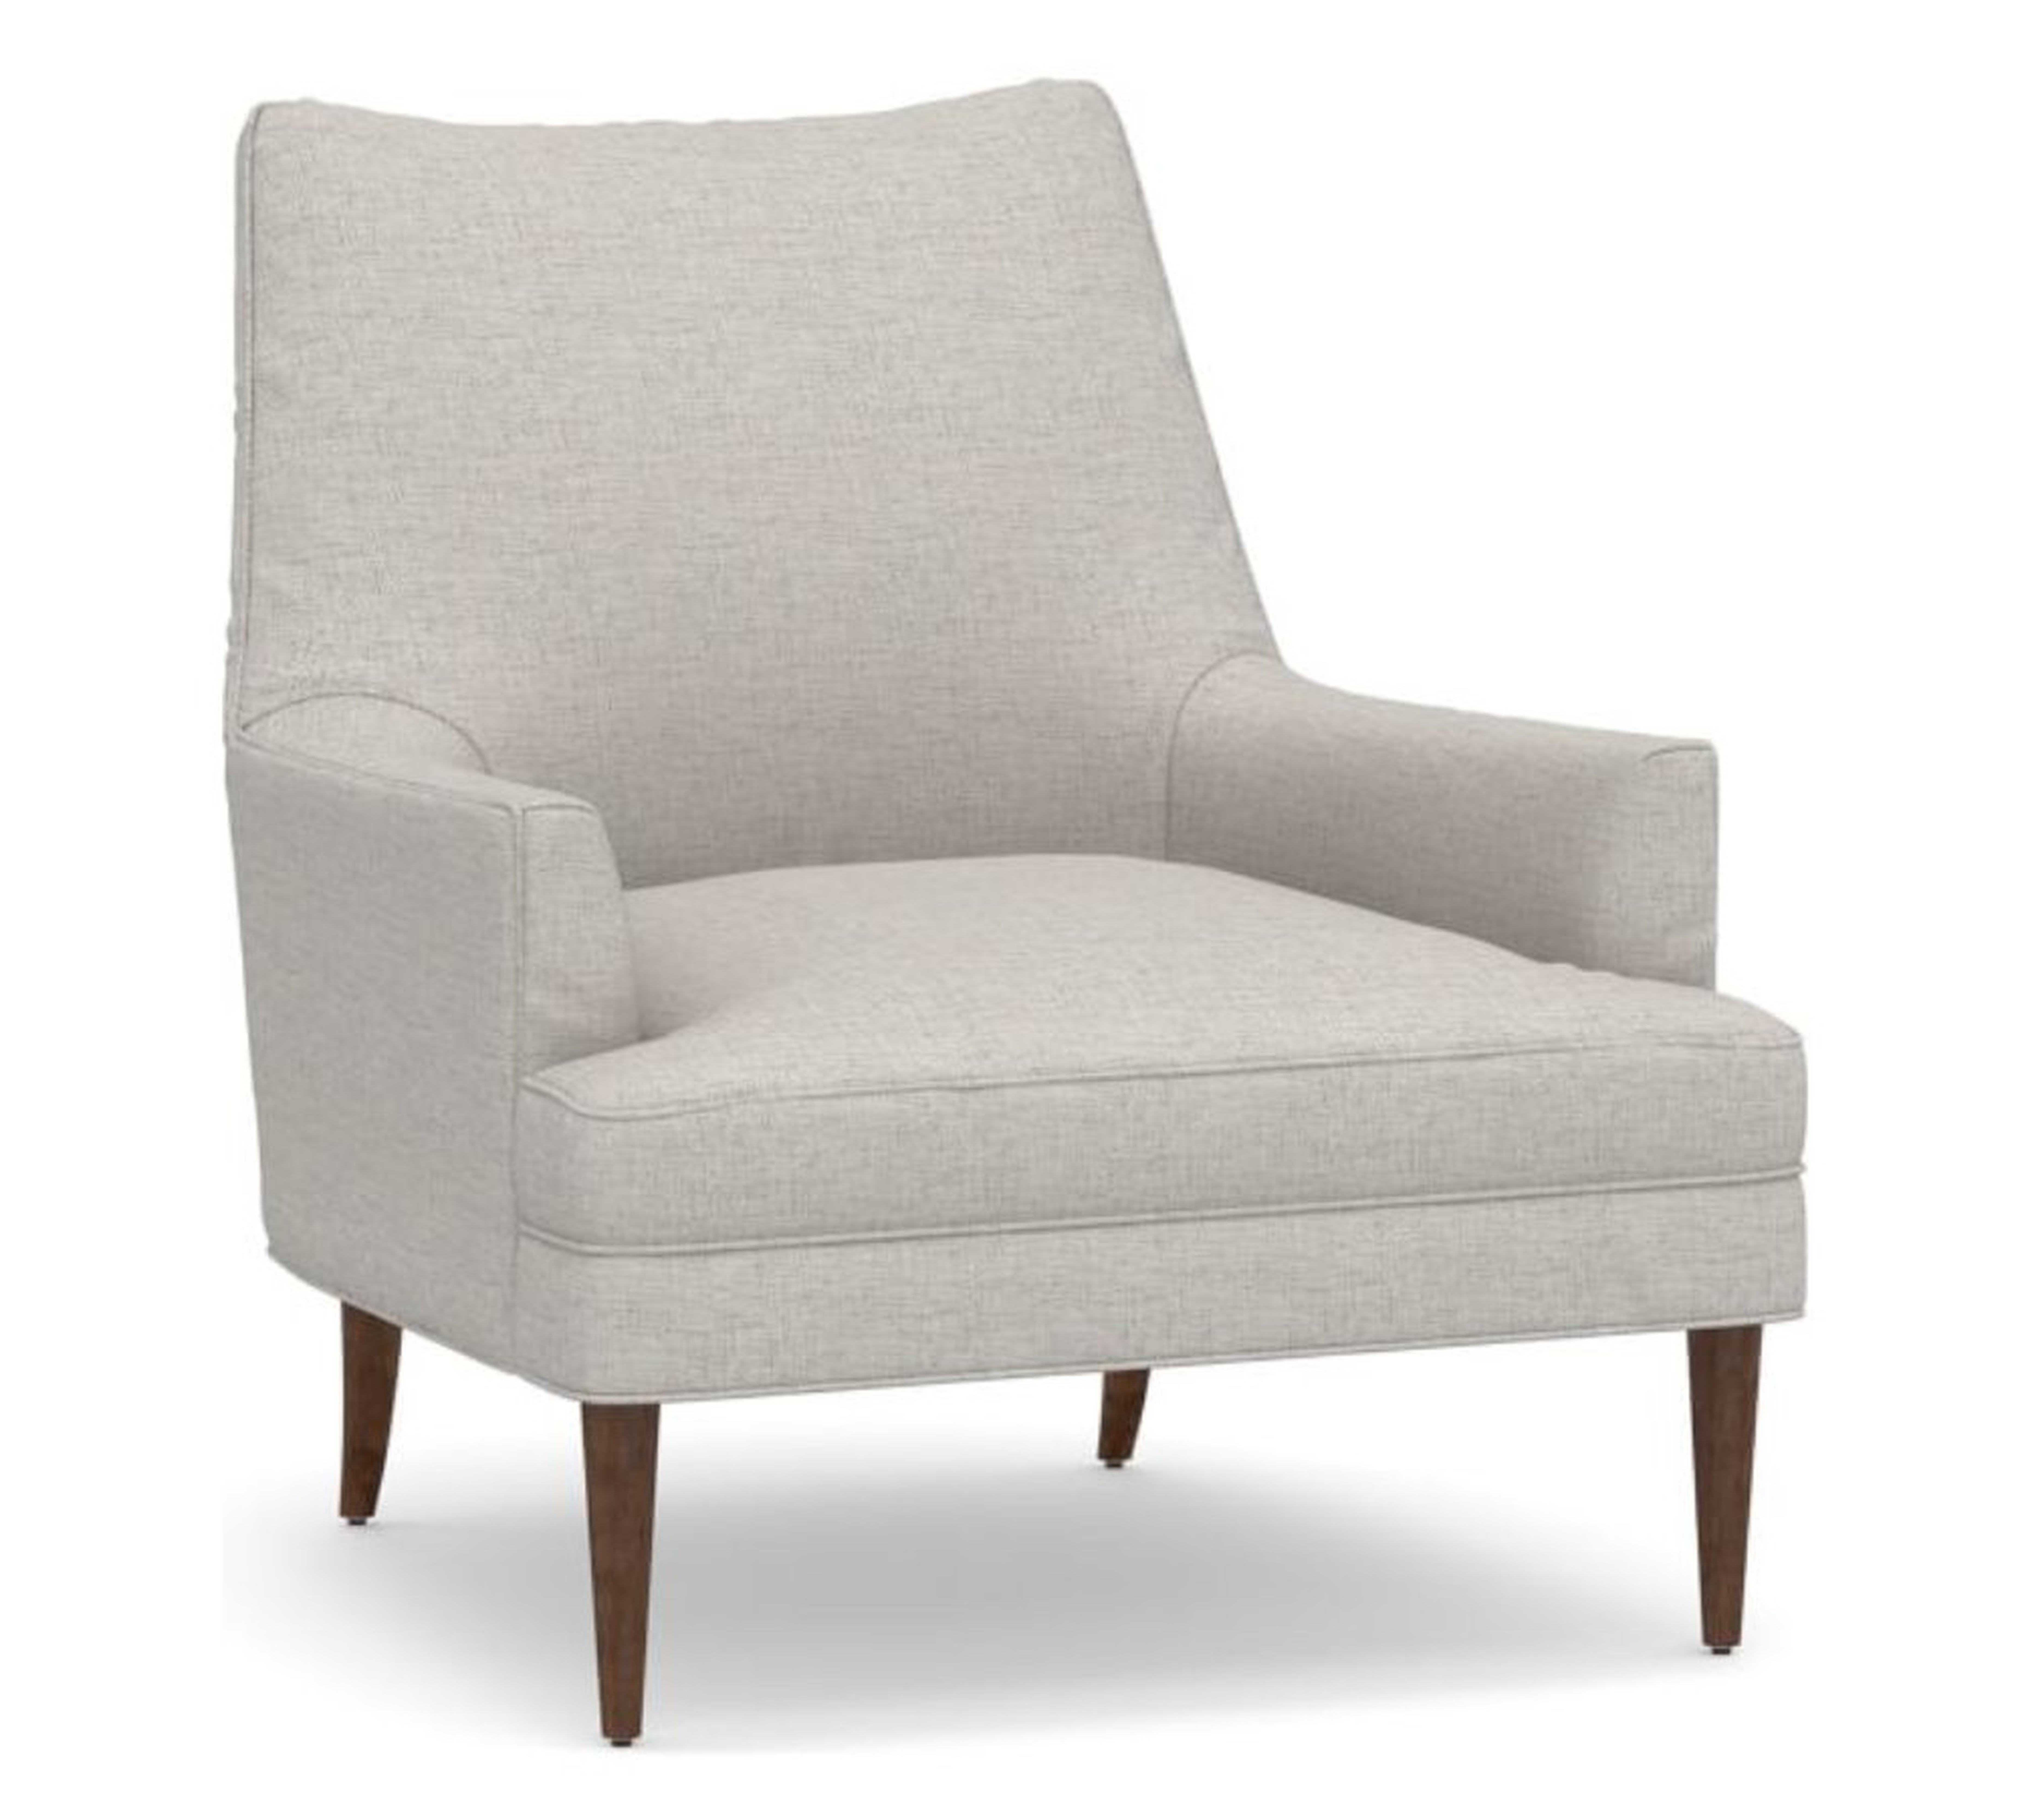 Reyes Upholstered Armchair, Polyester Wrapped Cushions, Heathered Twill Stone - Pottery Barn